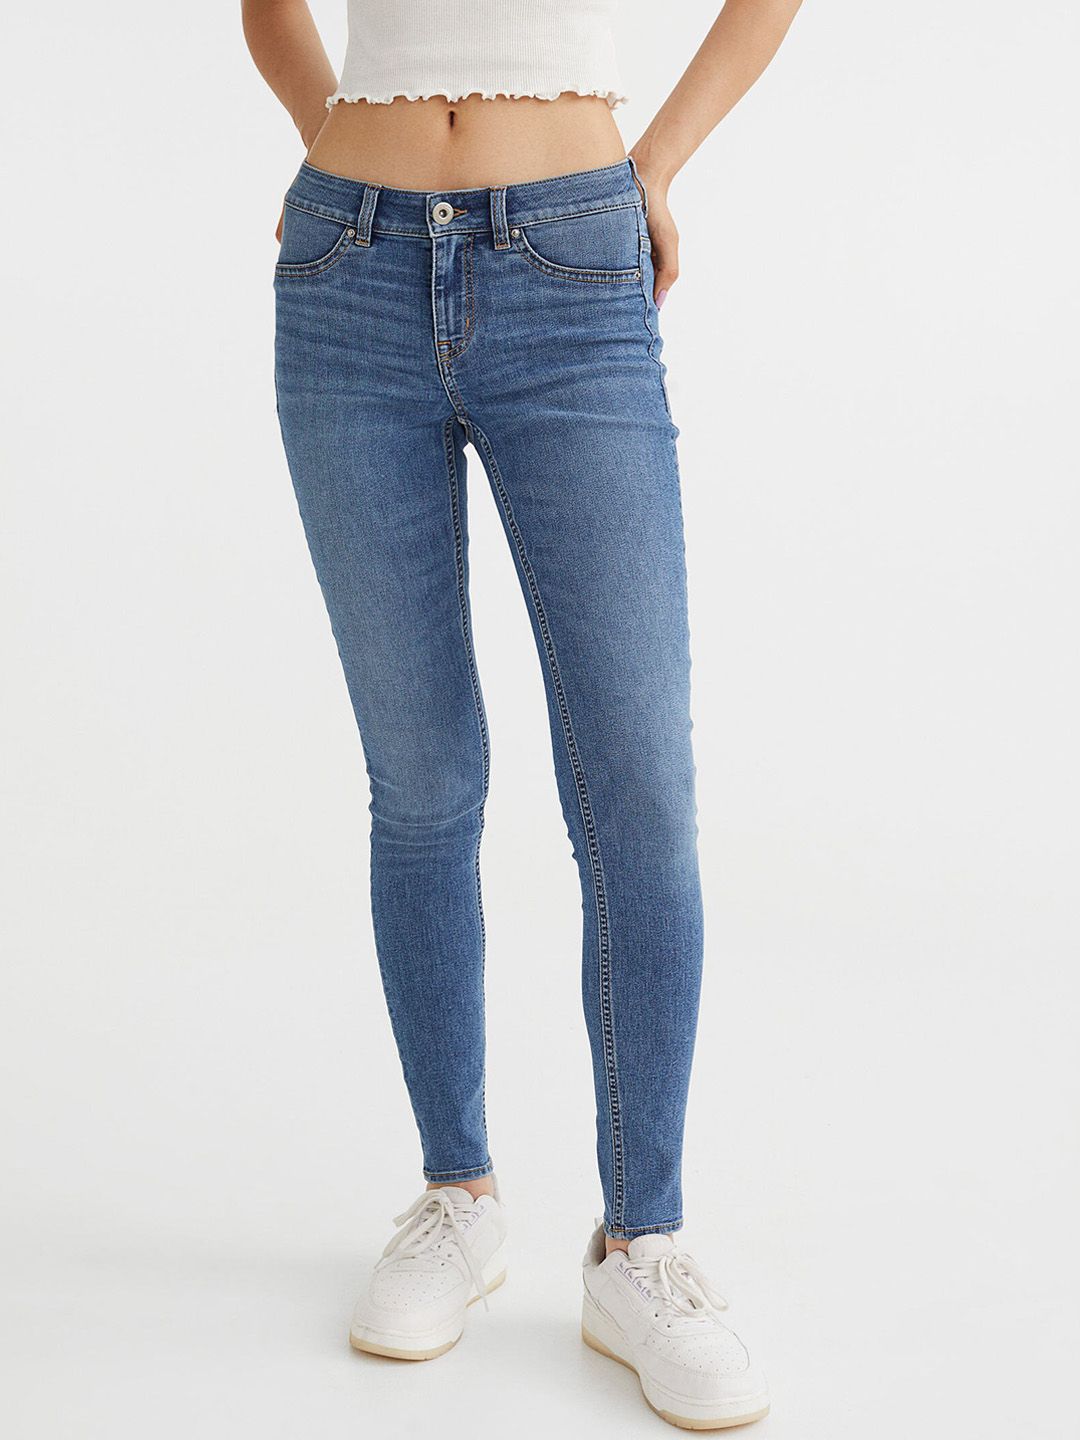 H&M Women Blue Light Fade Skinny Low Jeans Price in India